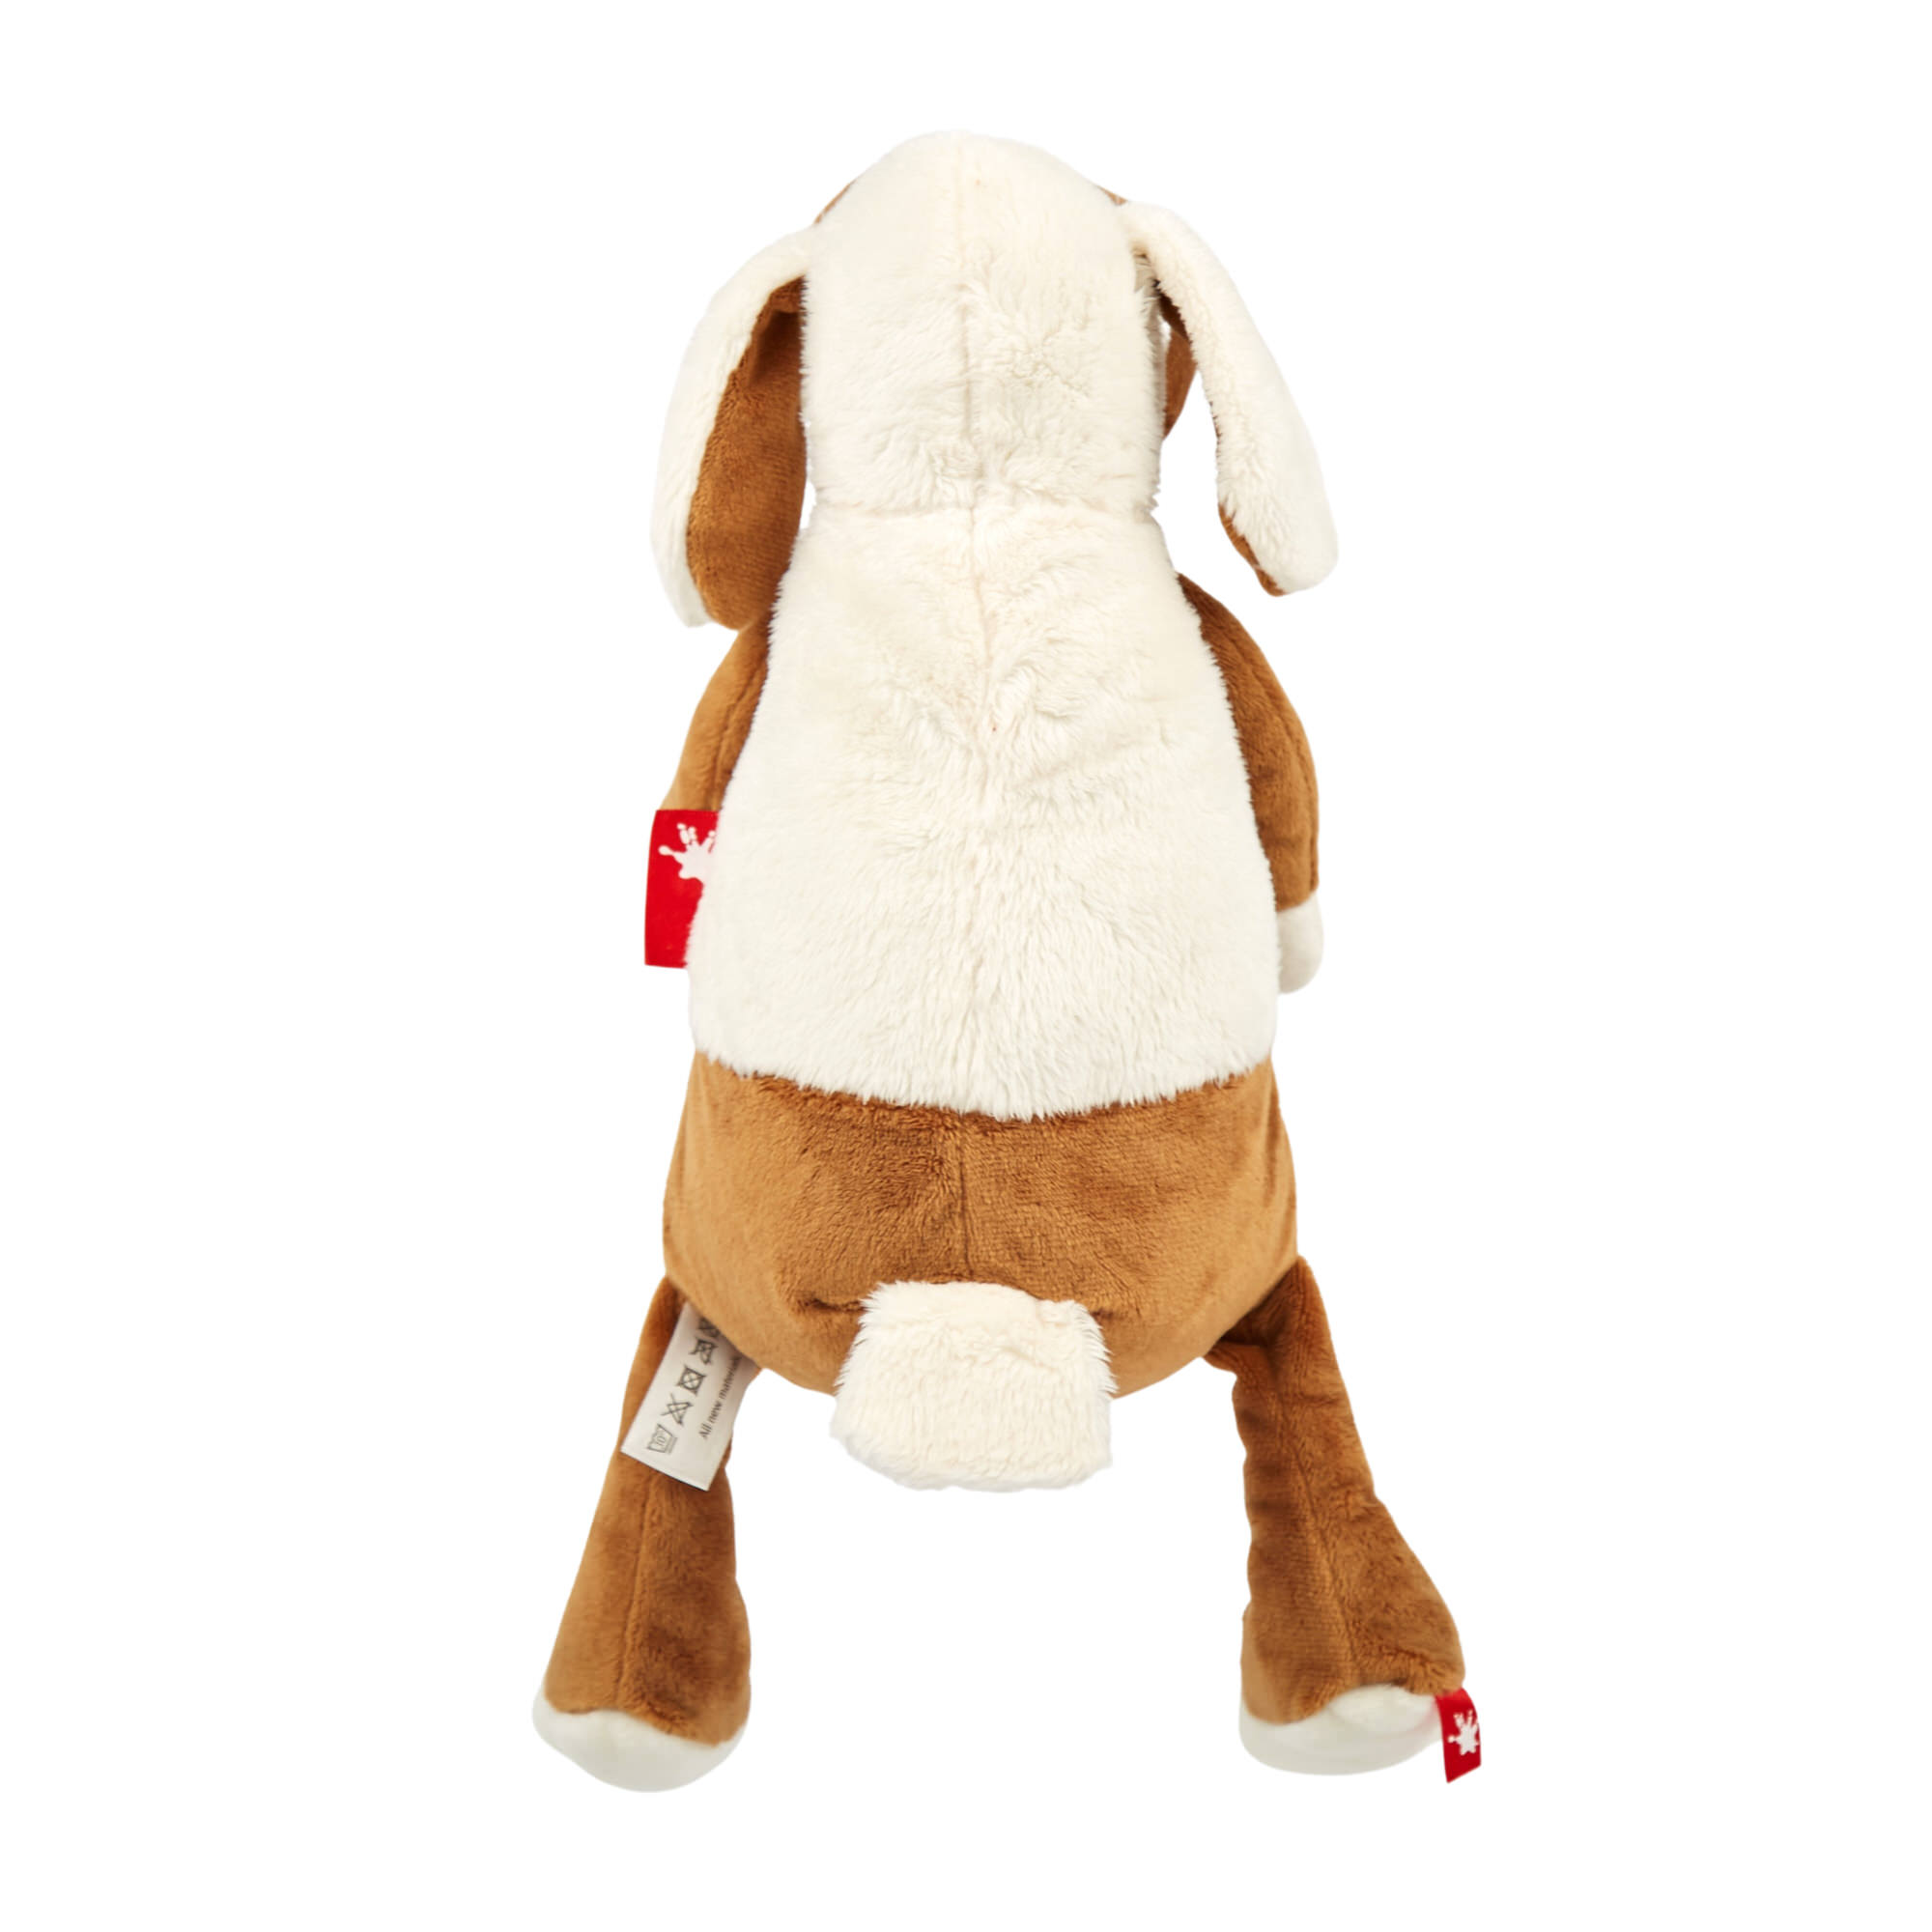 Soft toy sheep Dotte Dot, Country Crunchy